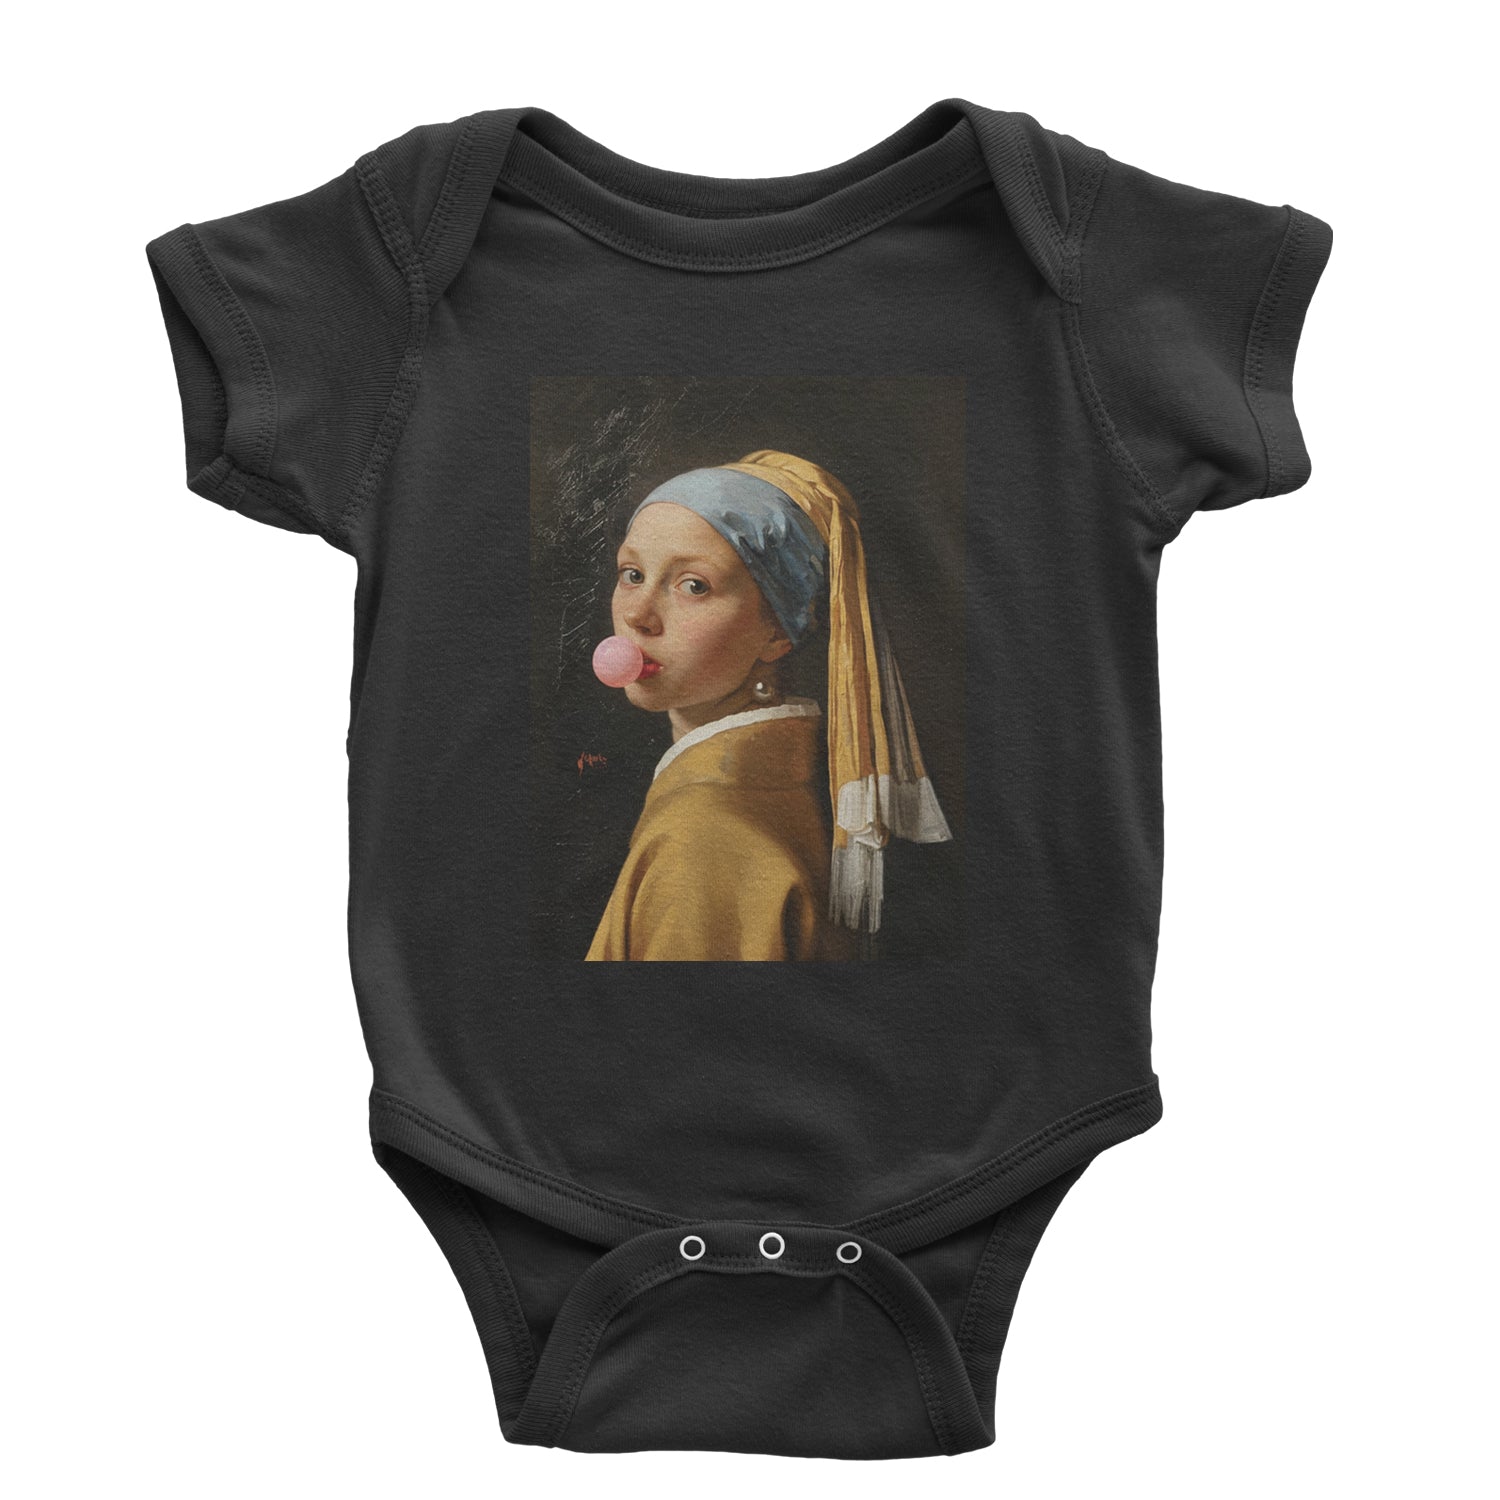 Girl with a Pearl Earring Bubble Gum Contemporary Art Infant One-Piece Romper Bodysuit and Toddler T-shirt